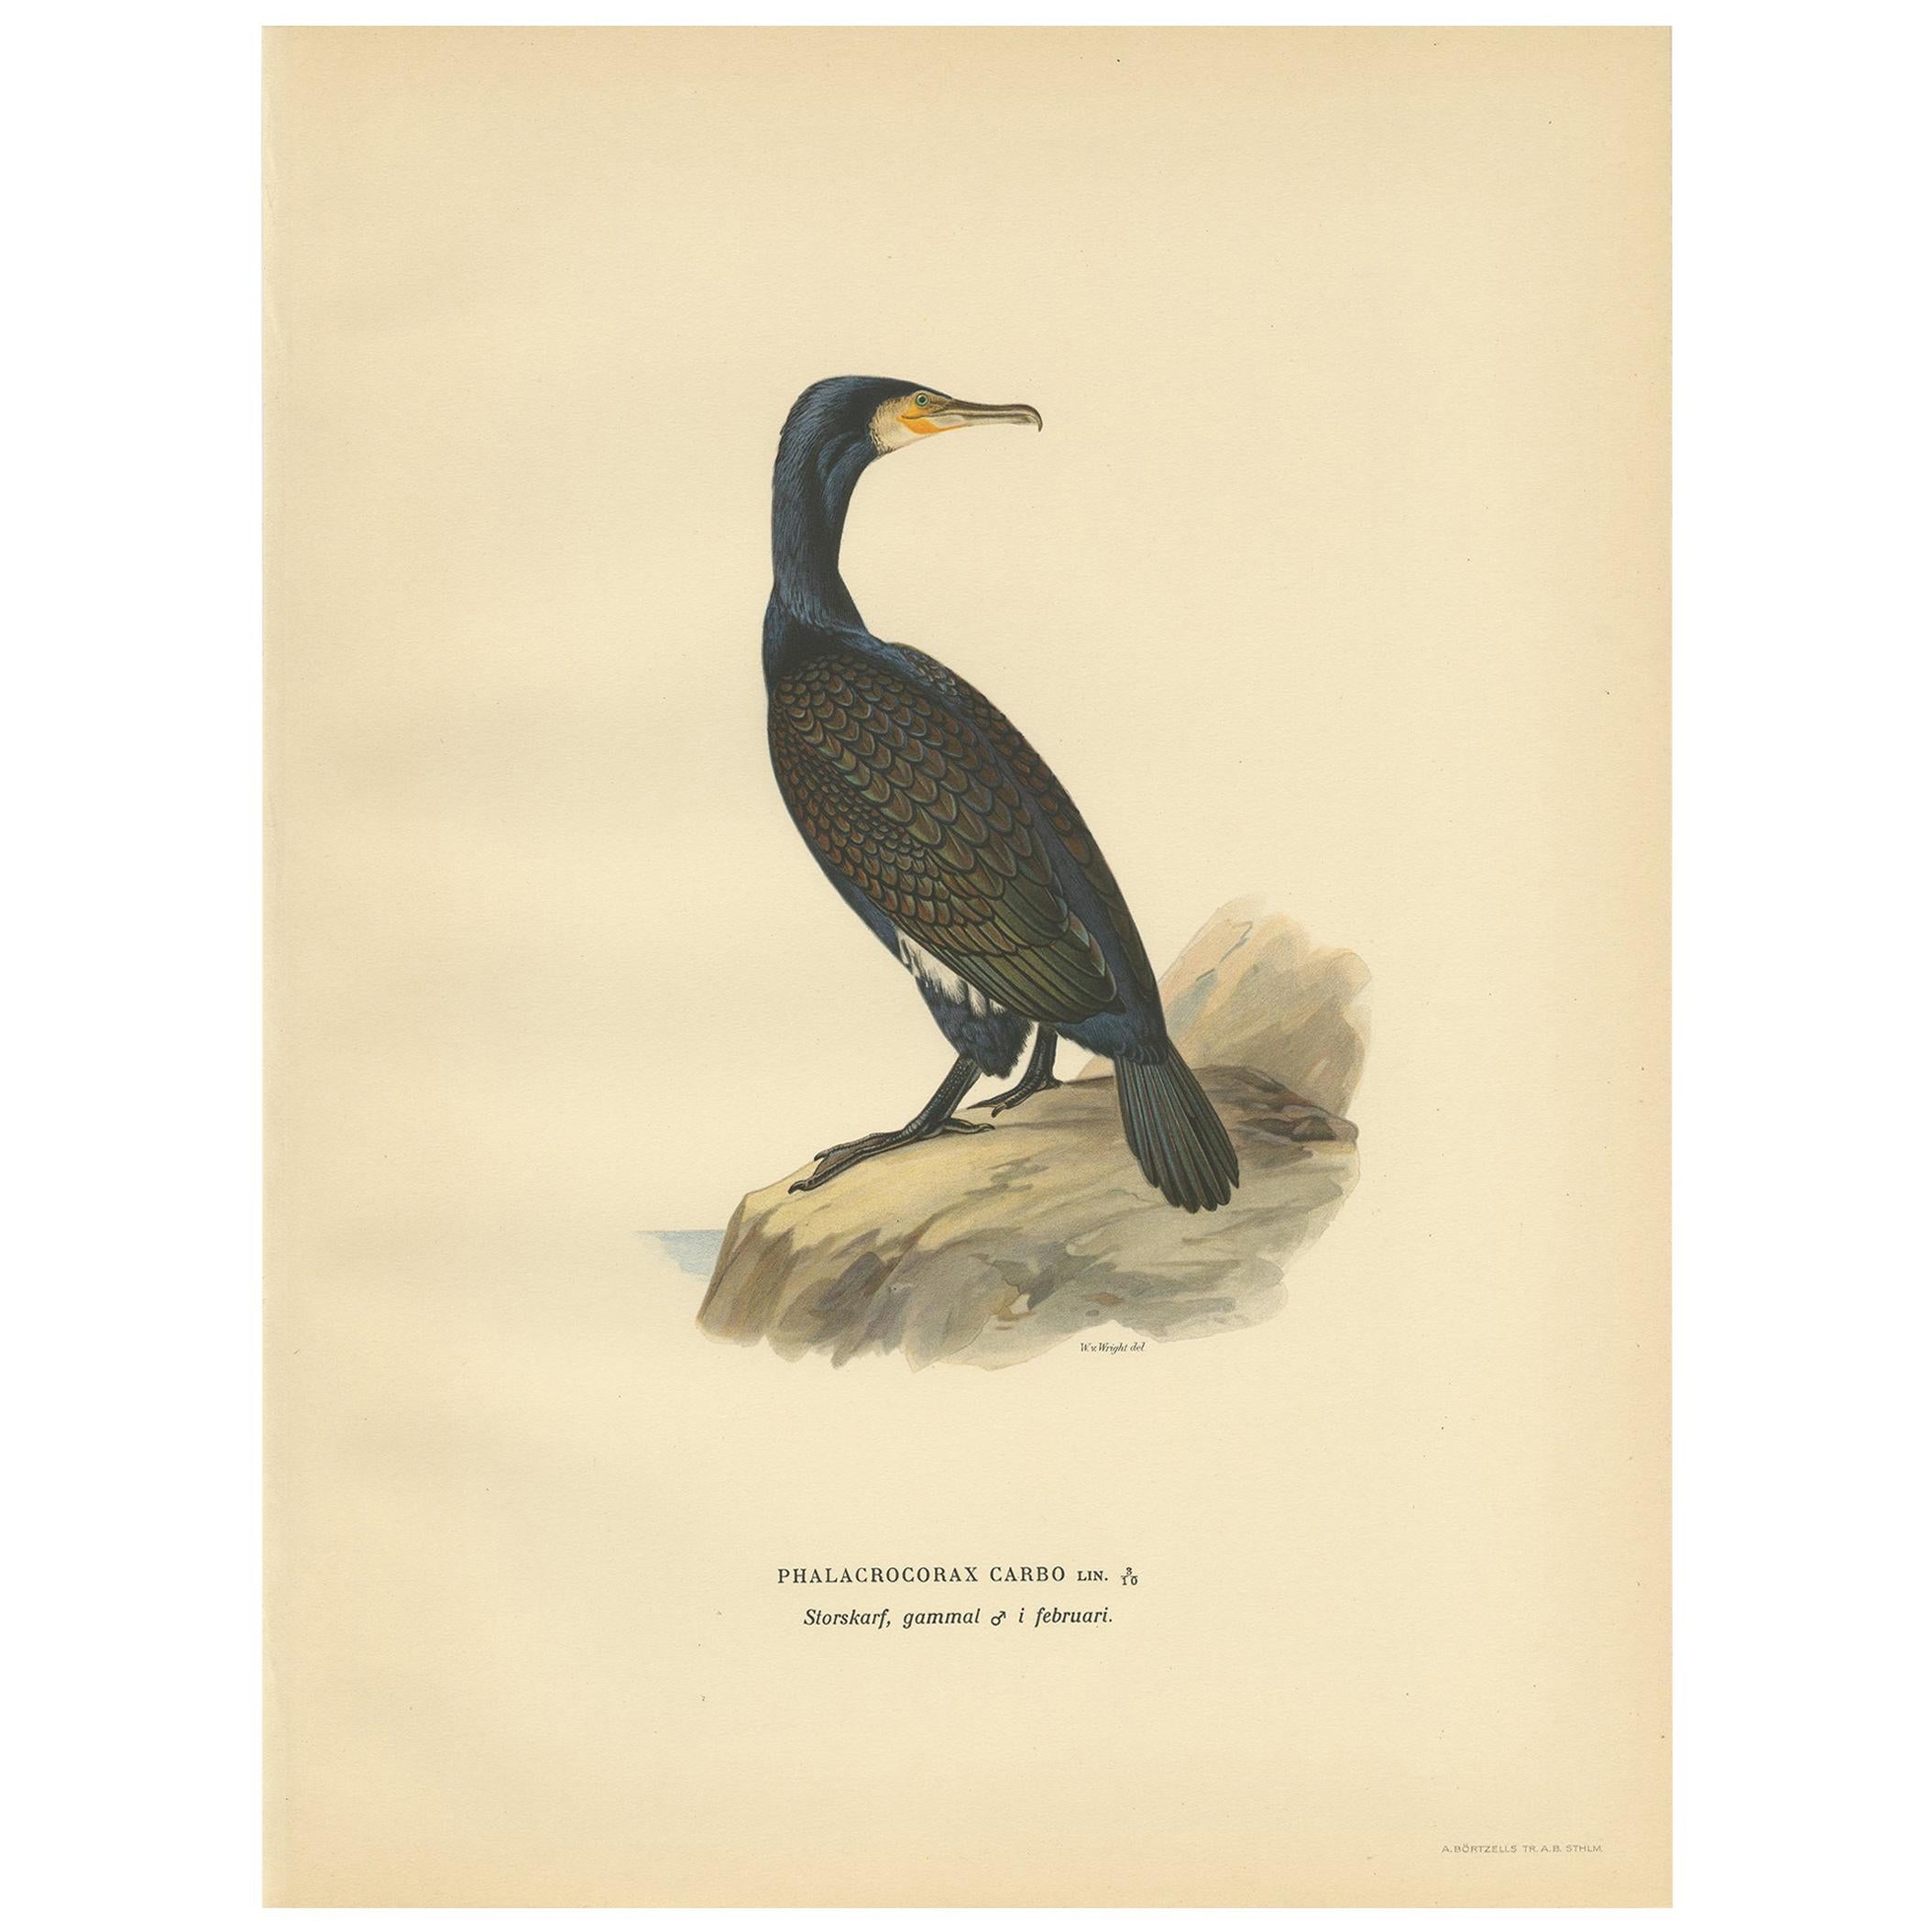 Antique Bird Print of the Great Cormorant by Von Wright, '1929'